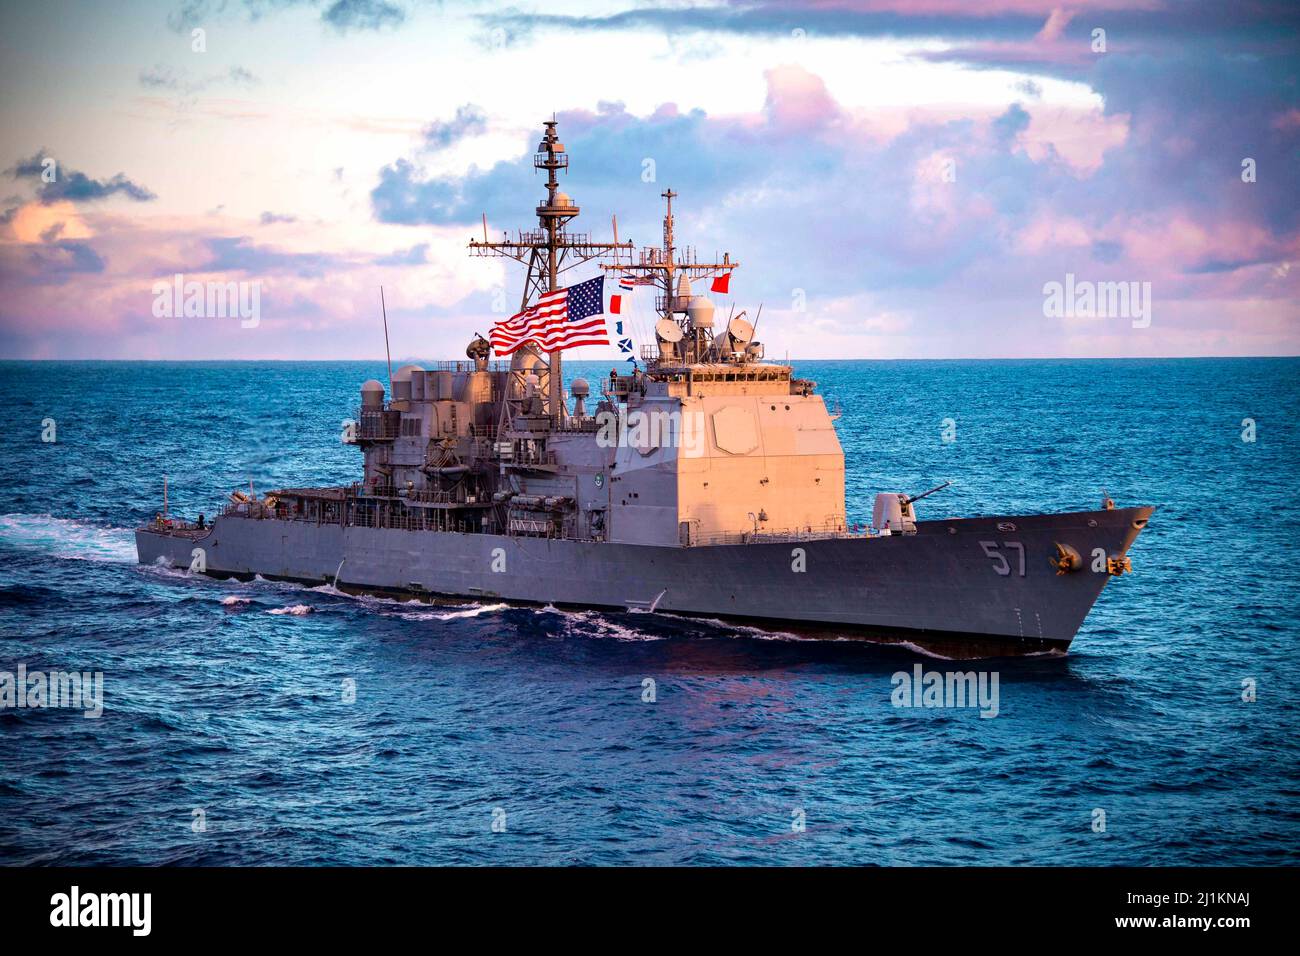 Pacific Ocean, United States. 09 February, 2022. The U.S. Navy Ticonderoga-class guided-missile cruiser USS Lake Champlain during an ocean transit at sunset, February 9, 2022 in the Pacific Ocean.  Credit: MC2 Haydn N. Smith/Planetpix/Alamy Live News Stock Photo